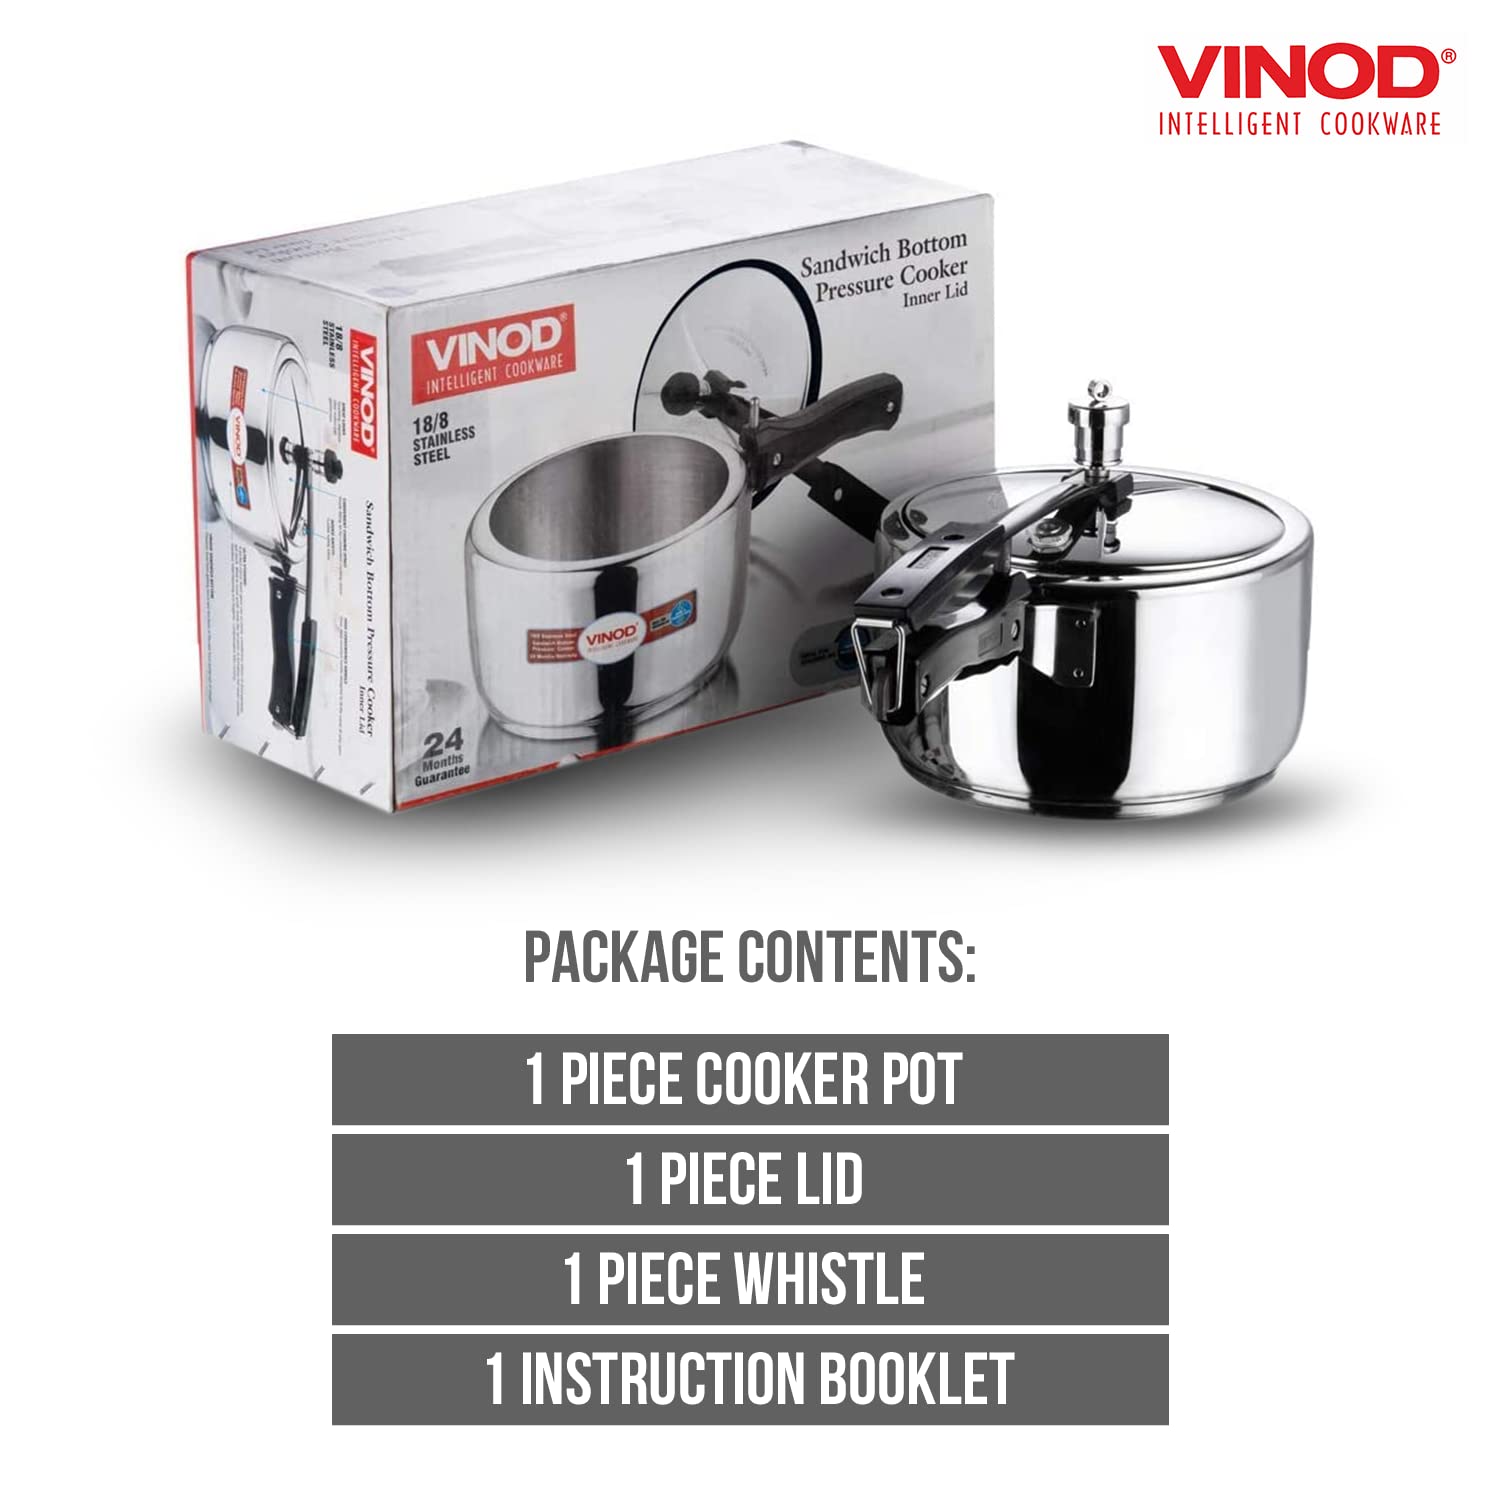 Vinod Pressure Cooker Stainless Steel – Inner Lid - 3.5 Liter – Sandwich Bottom – Indian Pressure Cooker – Induction Friendly Cooker – Best Used For Indian Cooking, Soups, and Rice Recipes, Quinoa